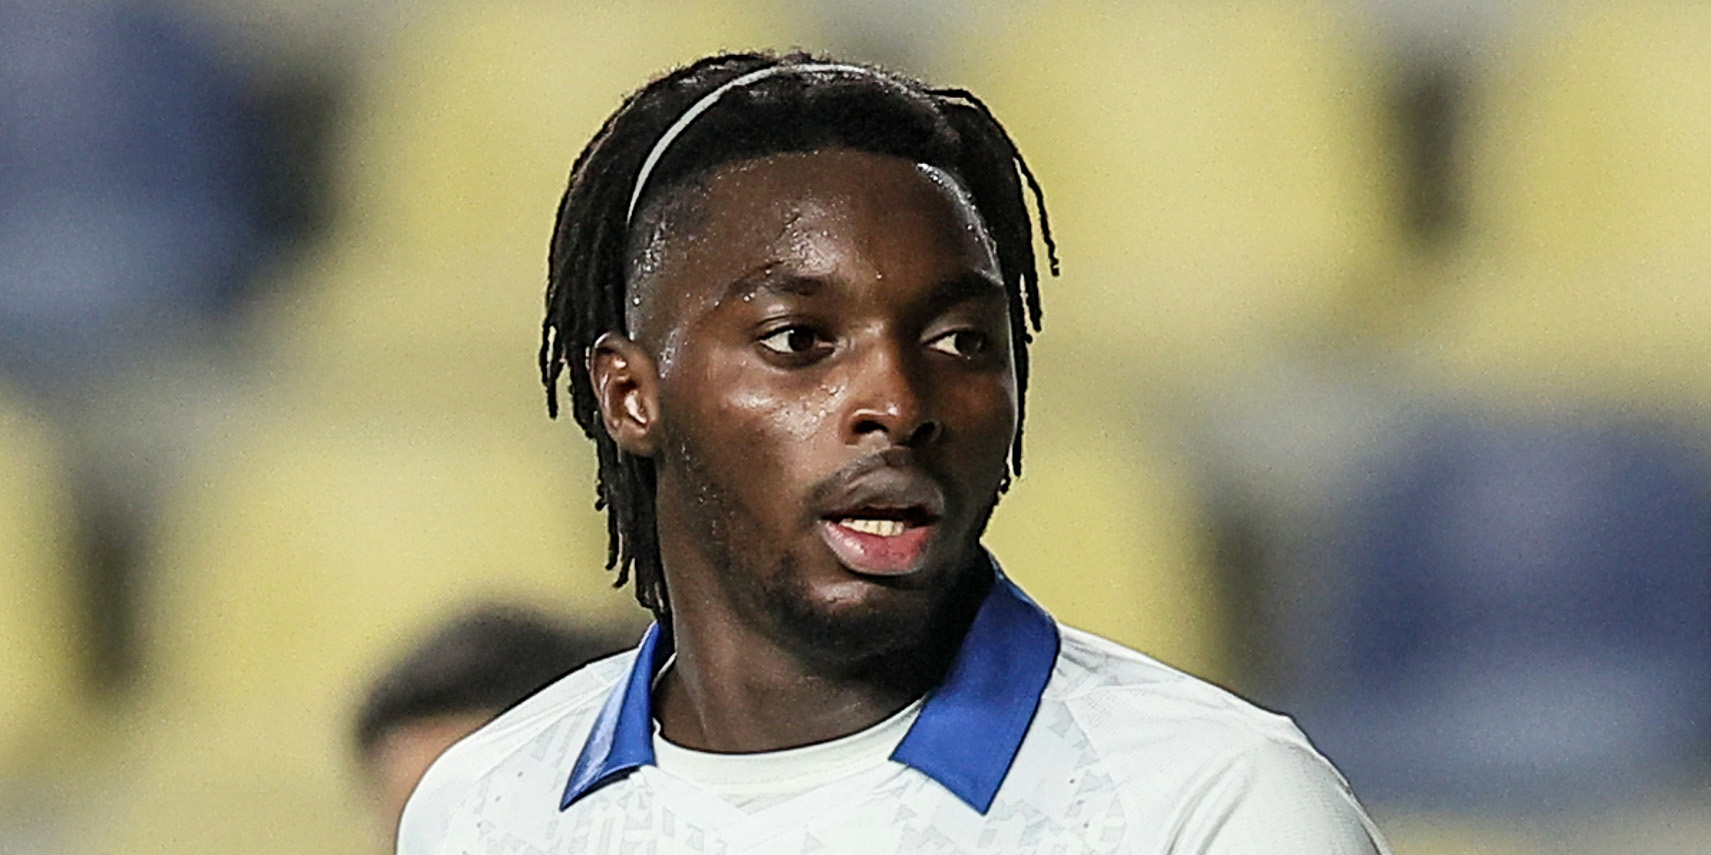 Will Flying Eagles striker Ahmed Abdullahi get his big chance at Gent?